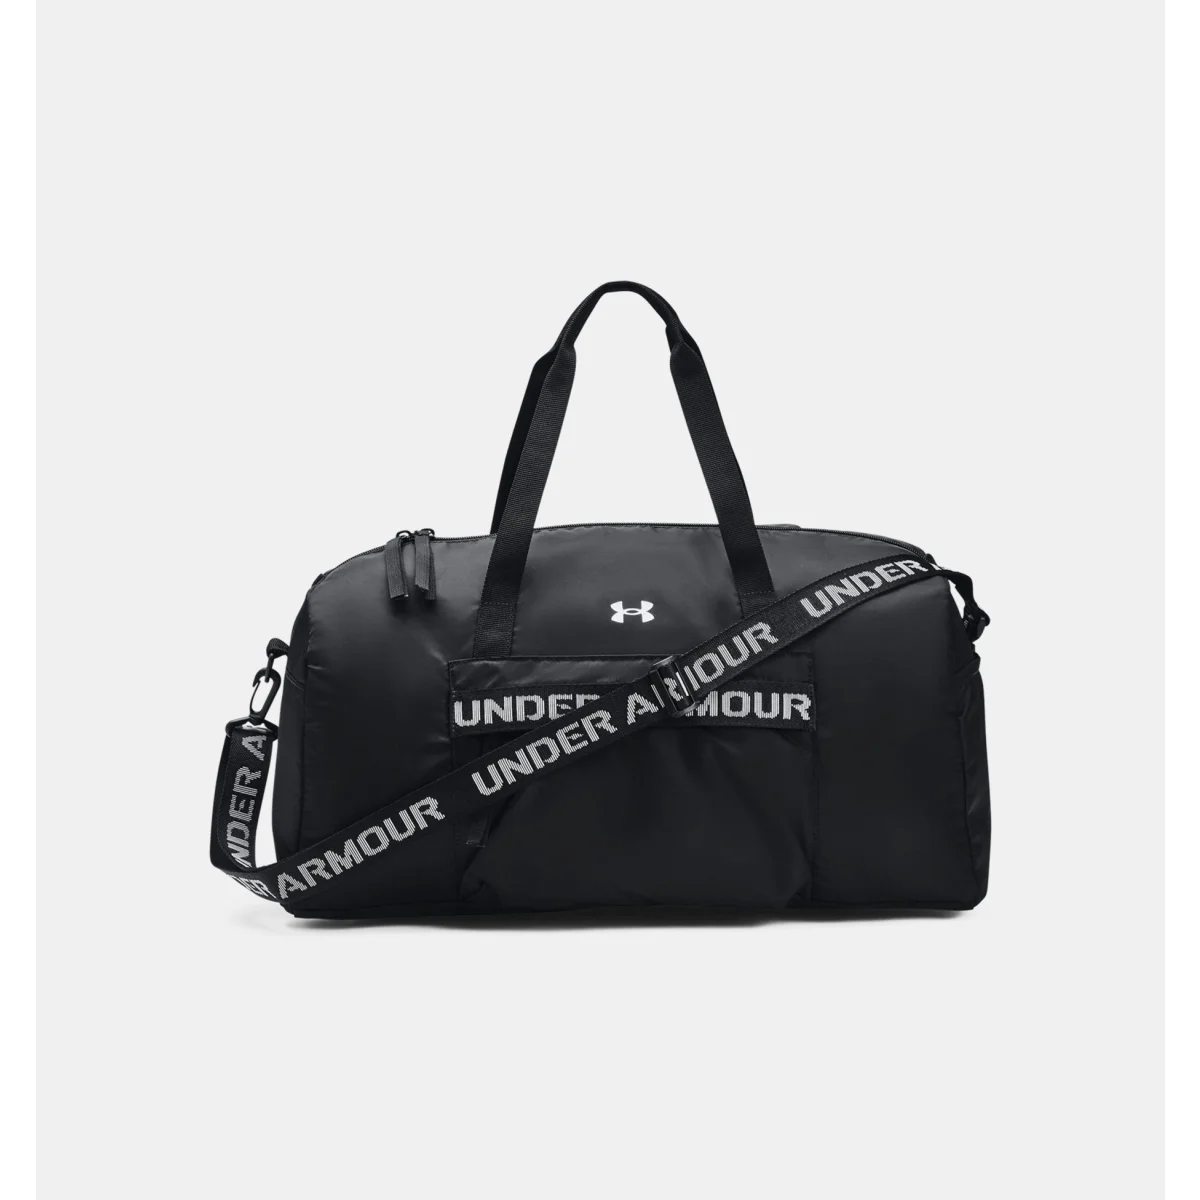 UNDER ARMMOUR Torba FAVORITE DUFFLE - 1369212-001